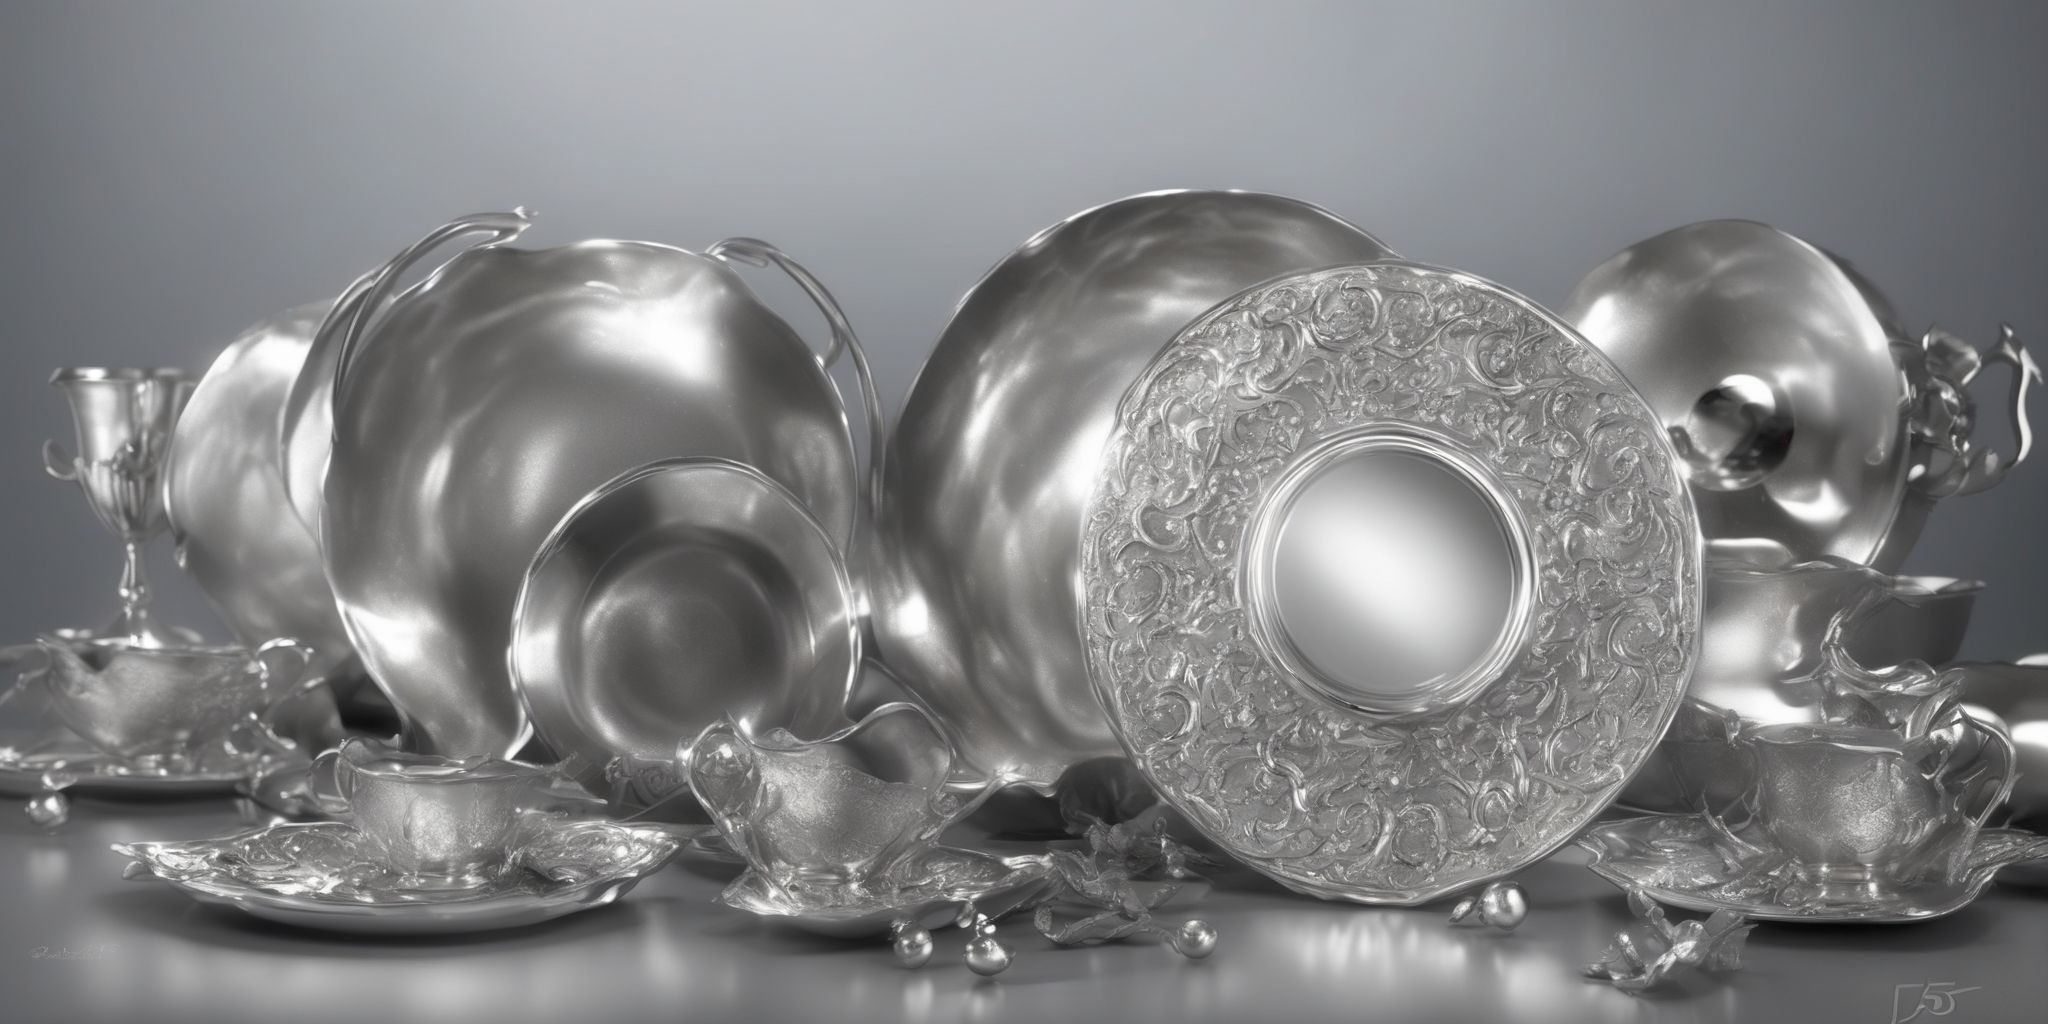 Silver  in realistic, photographic style